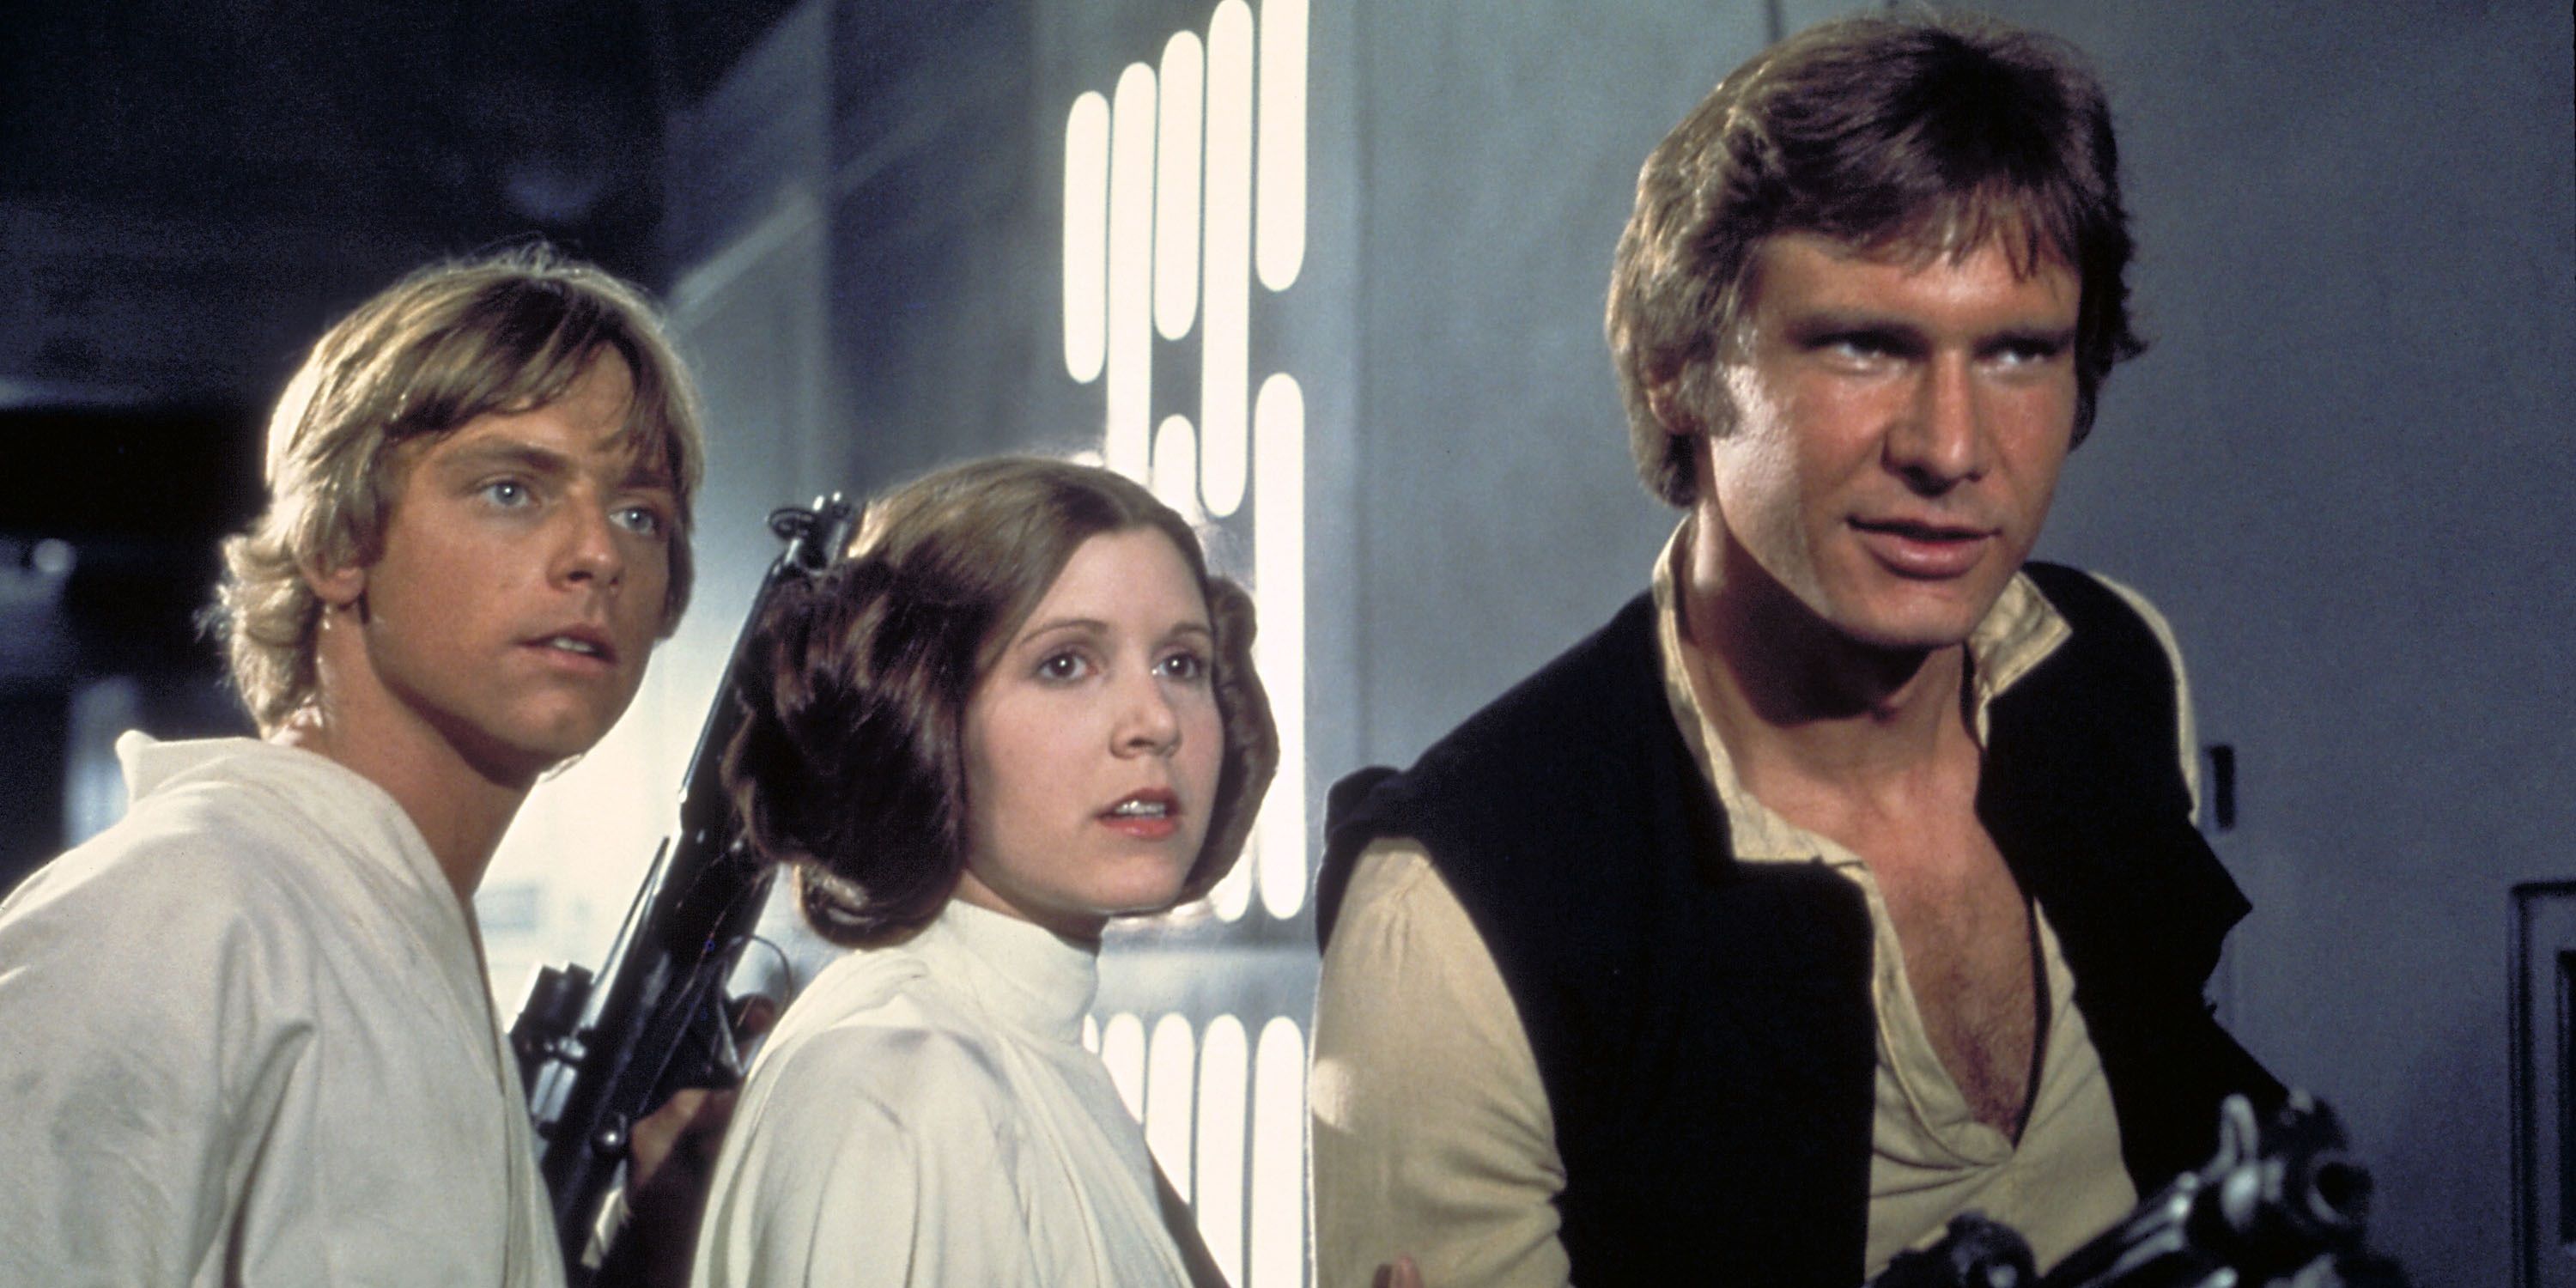 Luke, Leia, and Han on the Death Star in Star Wars